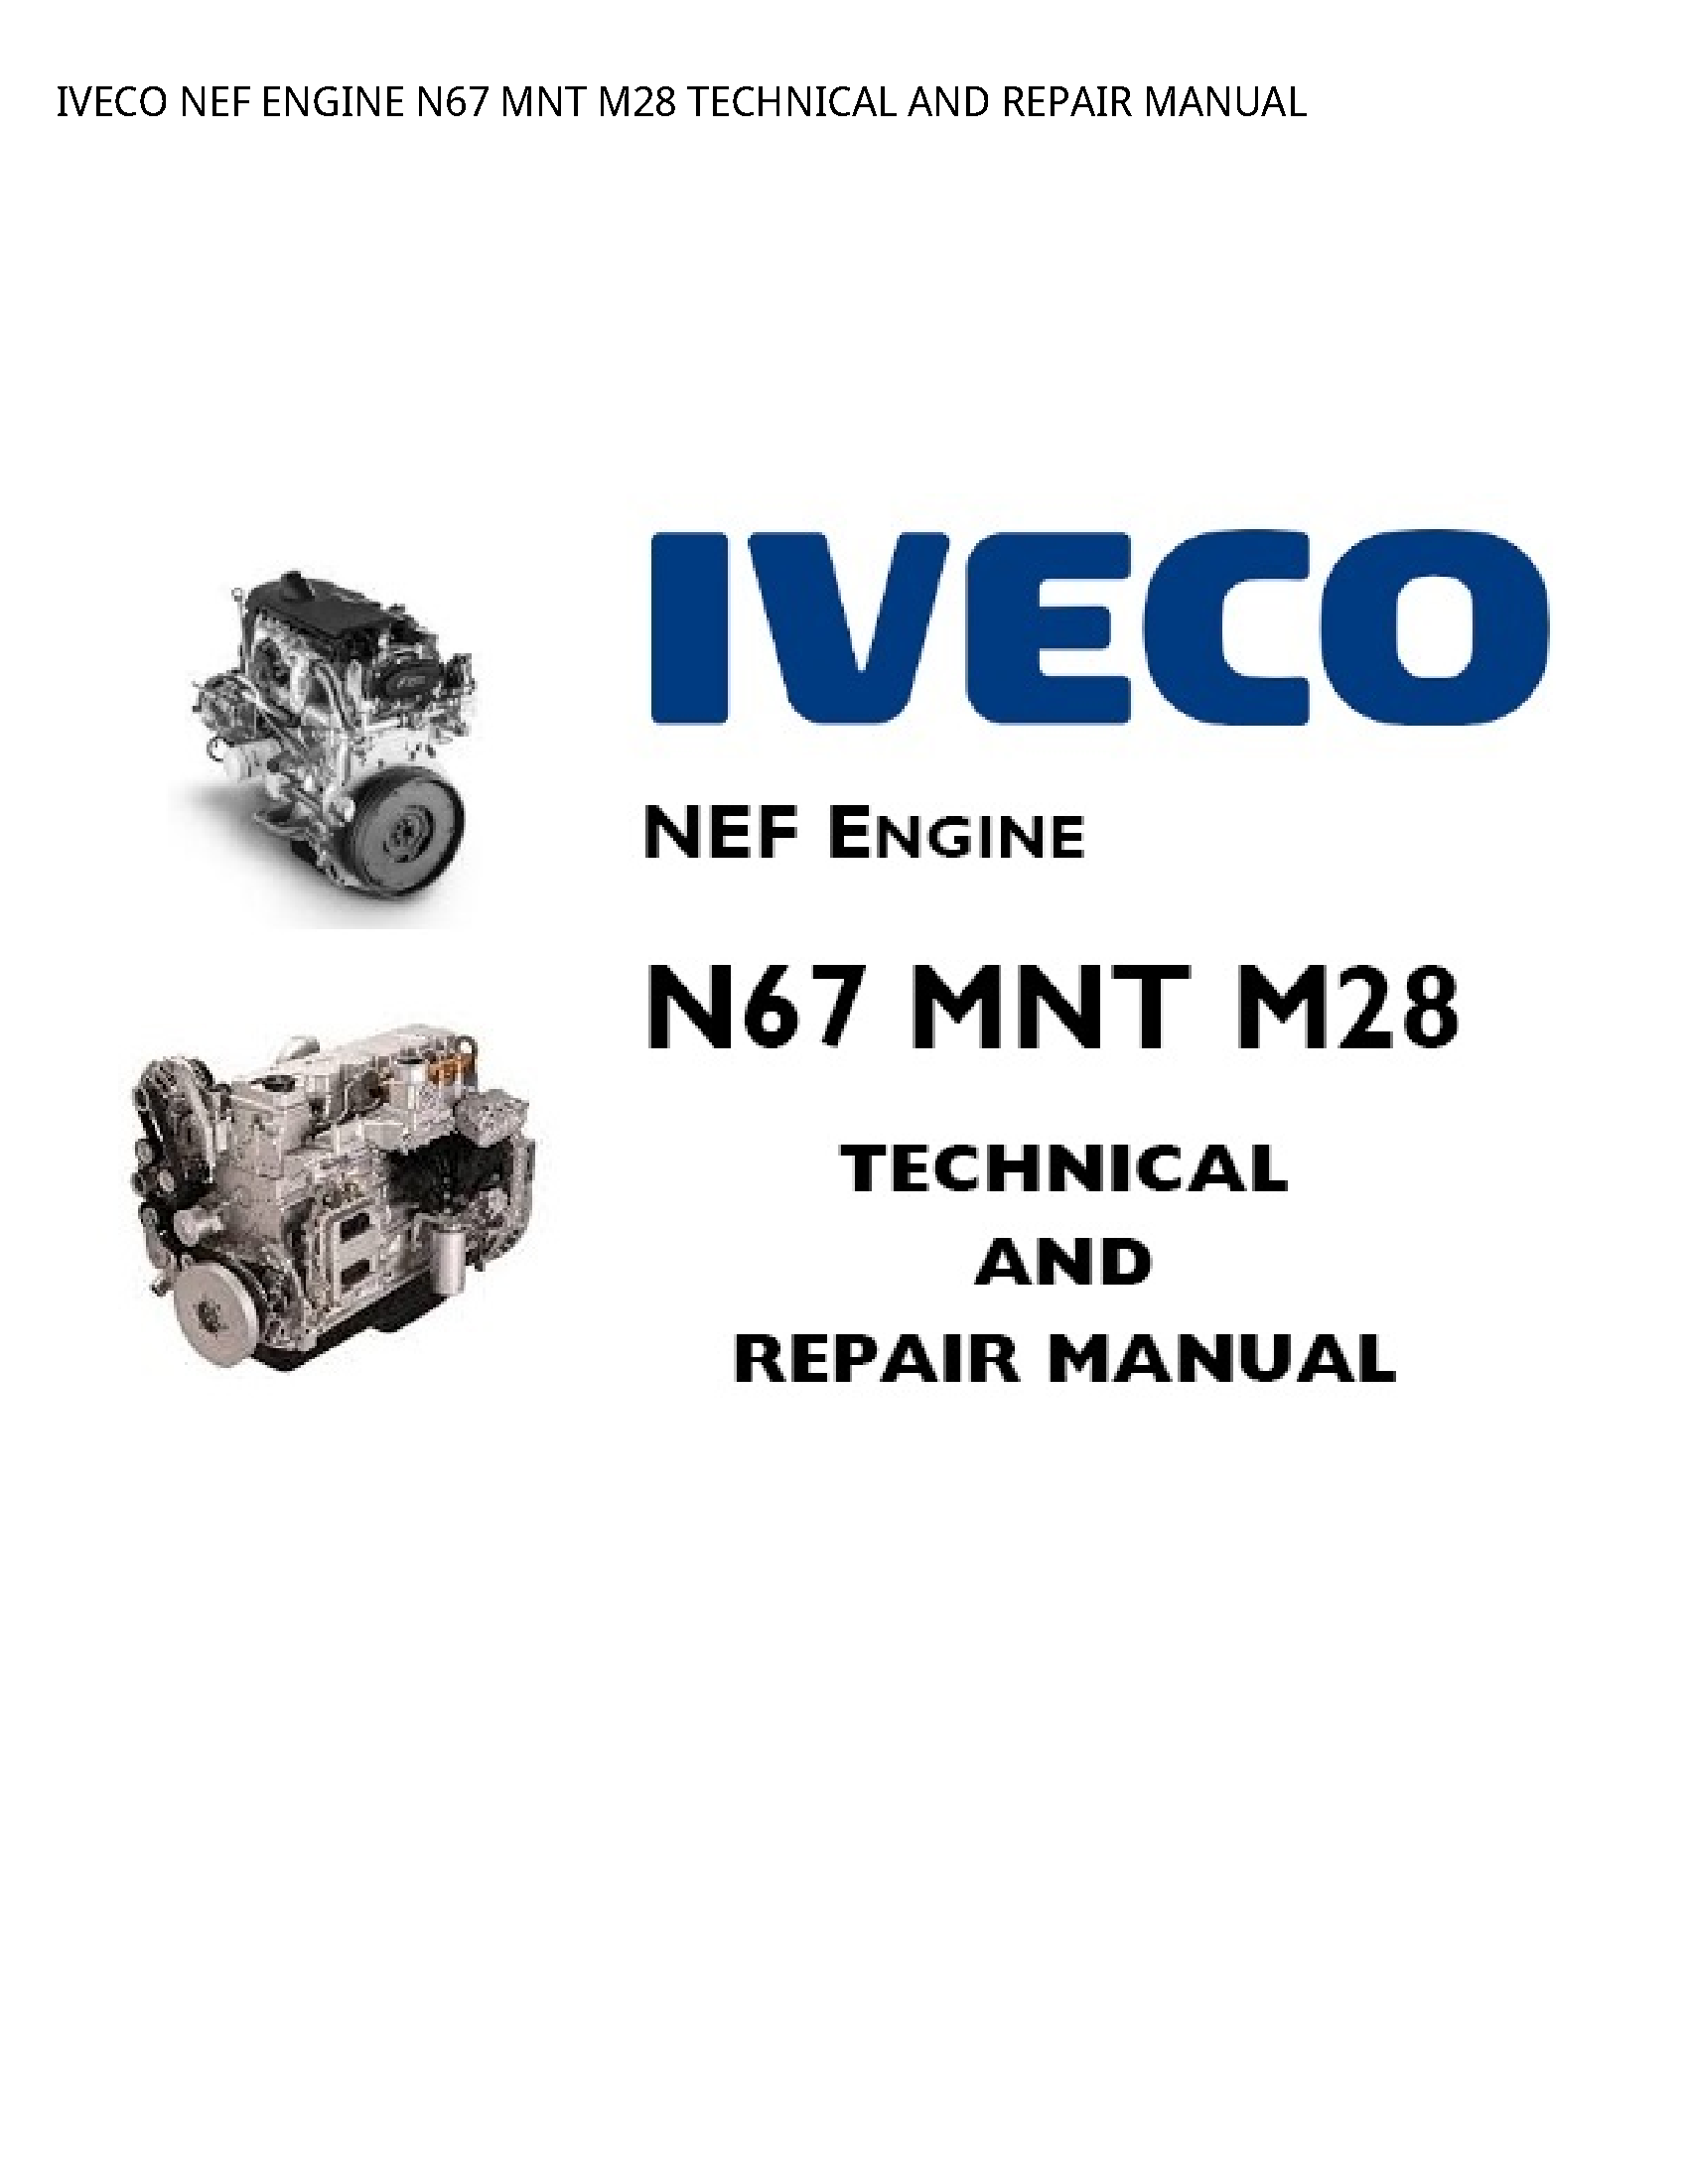 Iveco N67 NEF ENGINE MNT TECHNICAL AND REPAIR manual